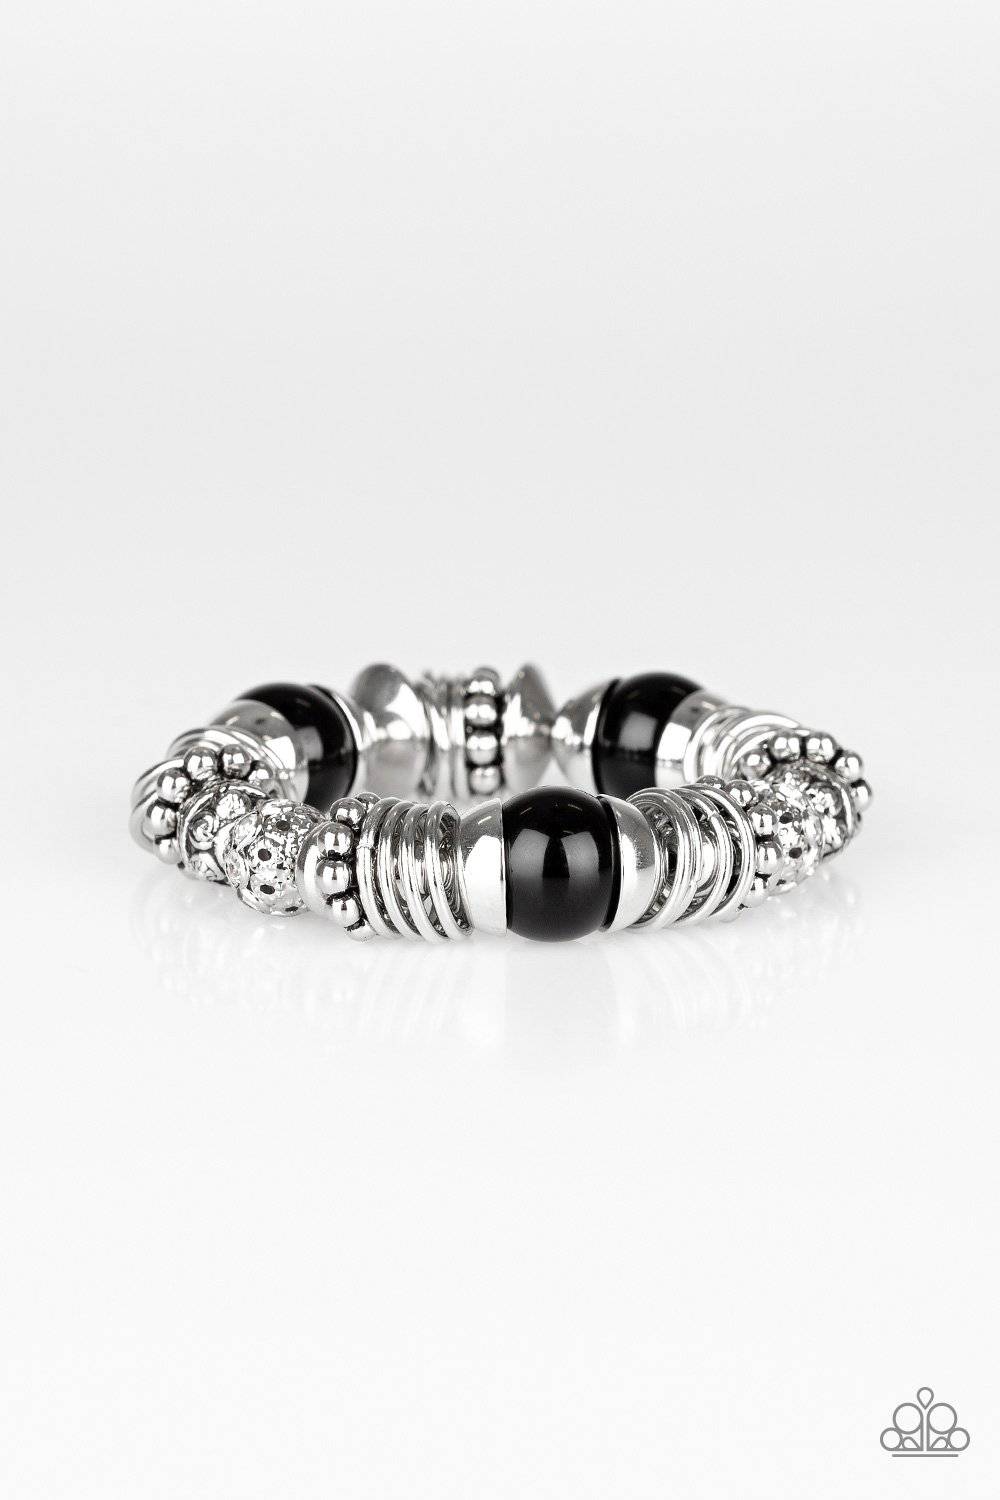 Uptown Tease - Black Bead and Silver Stretchy Bracelet - Paparazzi Accessories - GlaMarous Titi Jewels